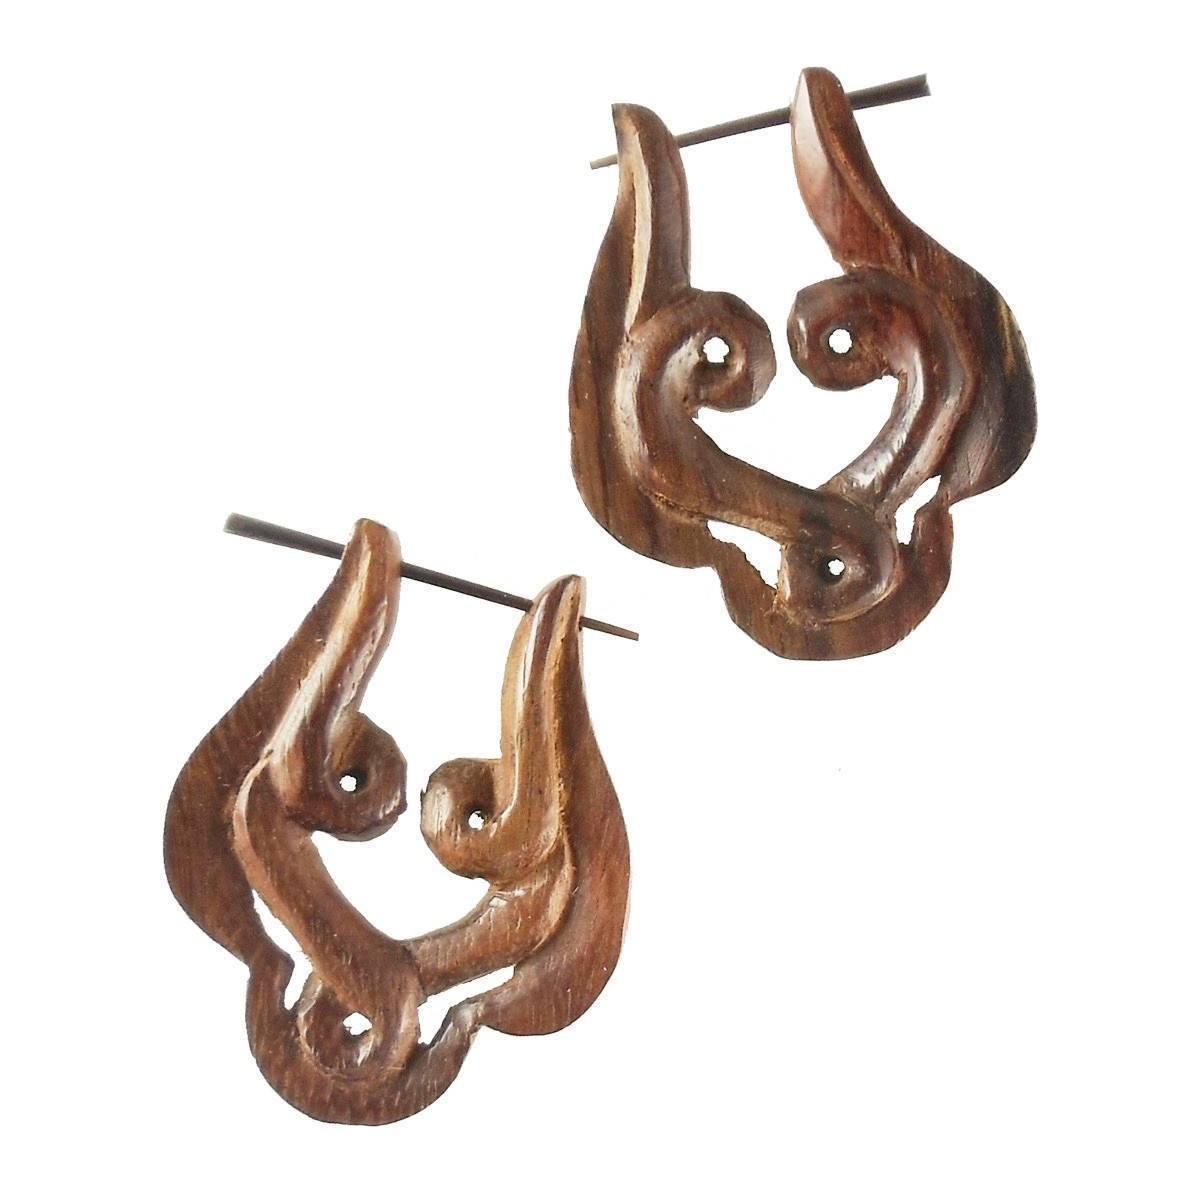 Celtic Trinity. Wooden Earrings, rosewood. 1 1/4 inch W x 1 1/2 inch L. (seconds)